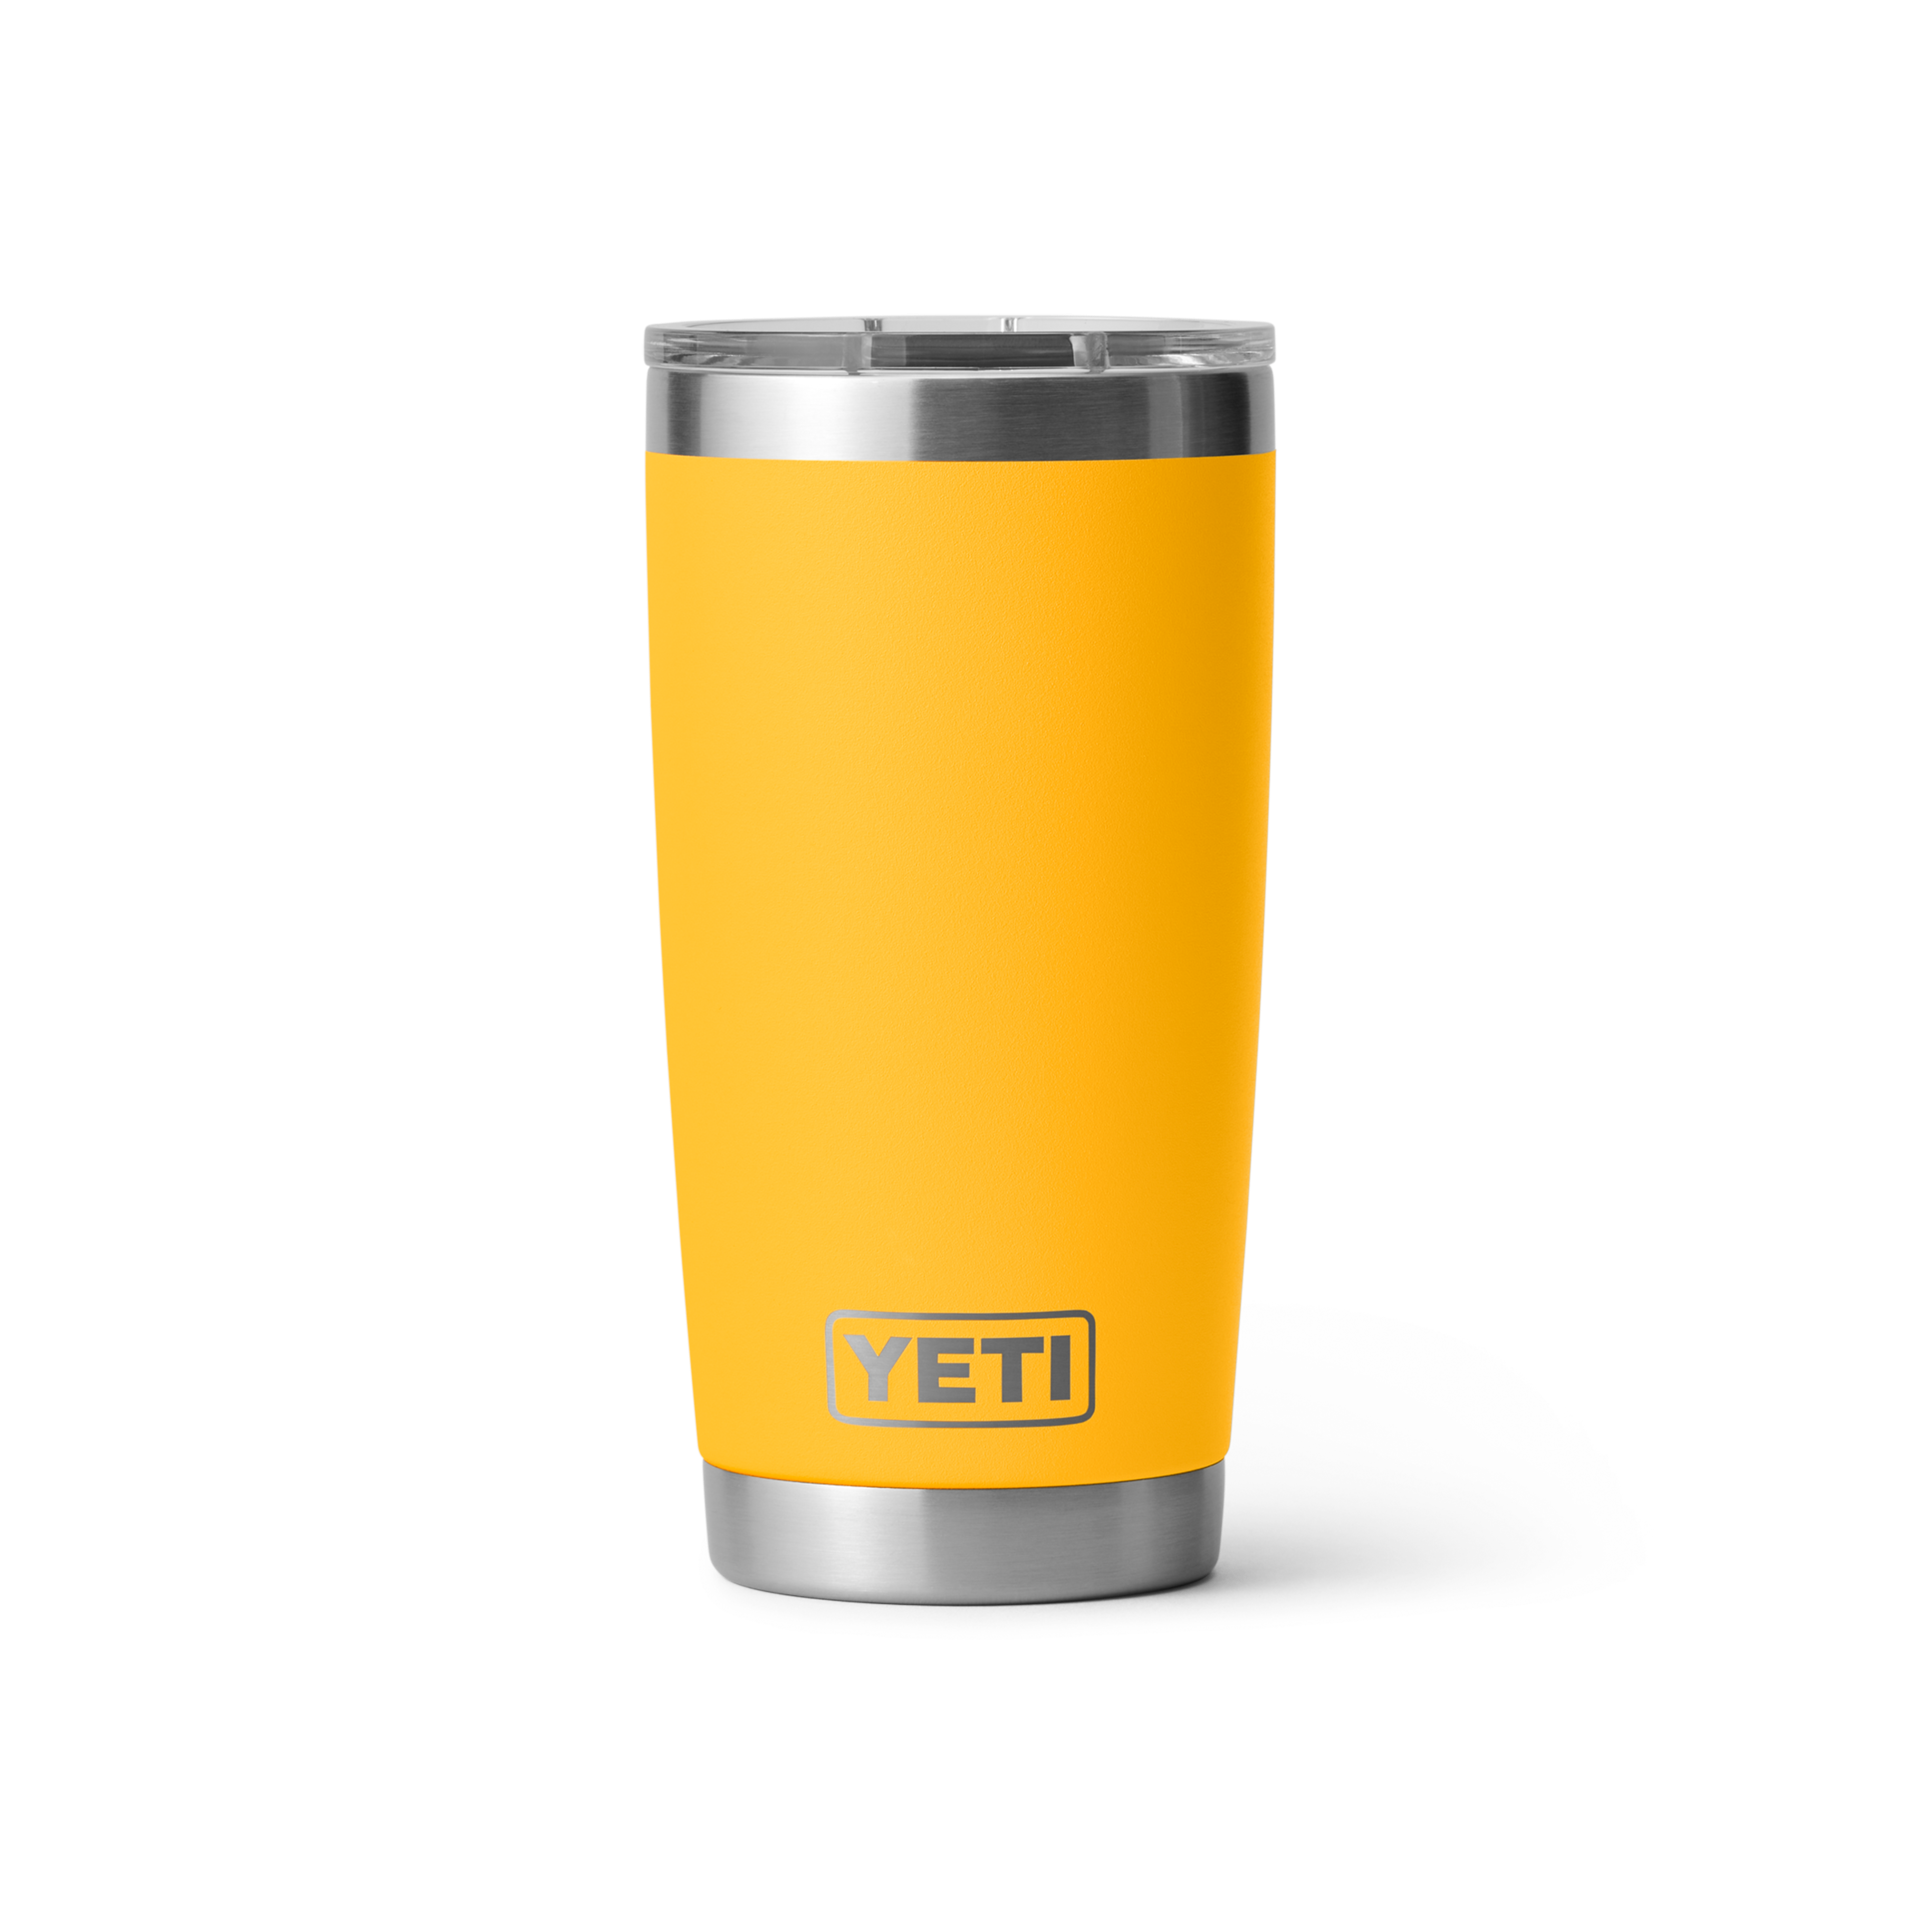 YETI Rambler 10 oz Stackable Mug, Stainless Steel, Vacuum  Insulated with MagSlider Lid, Sharptail Taupe: Tumblers & Water Glasses